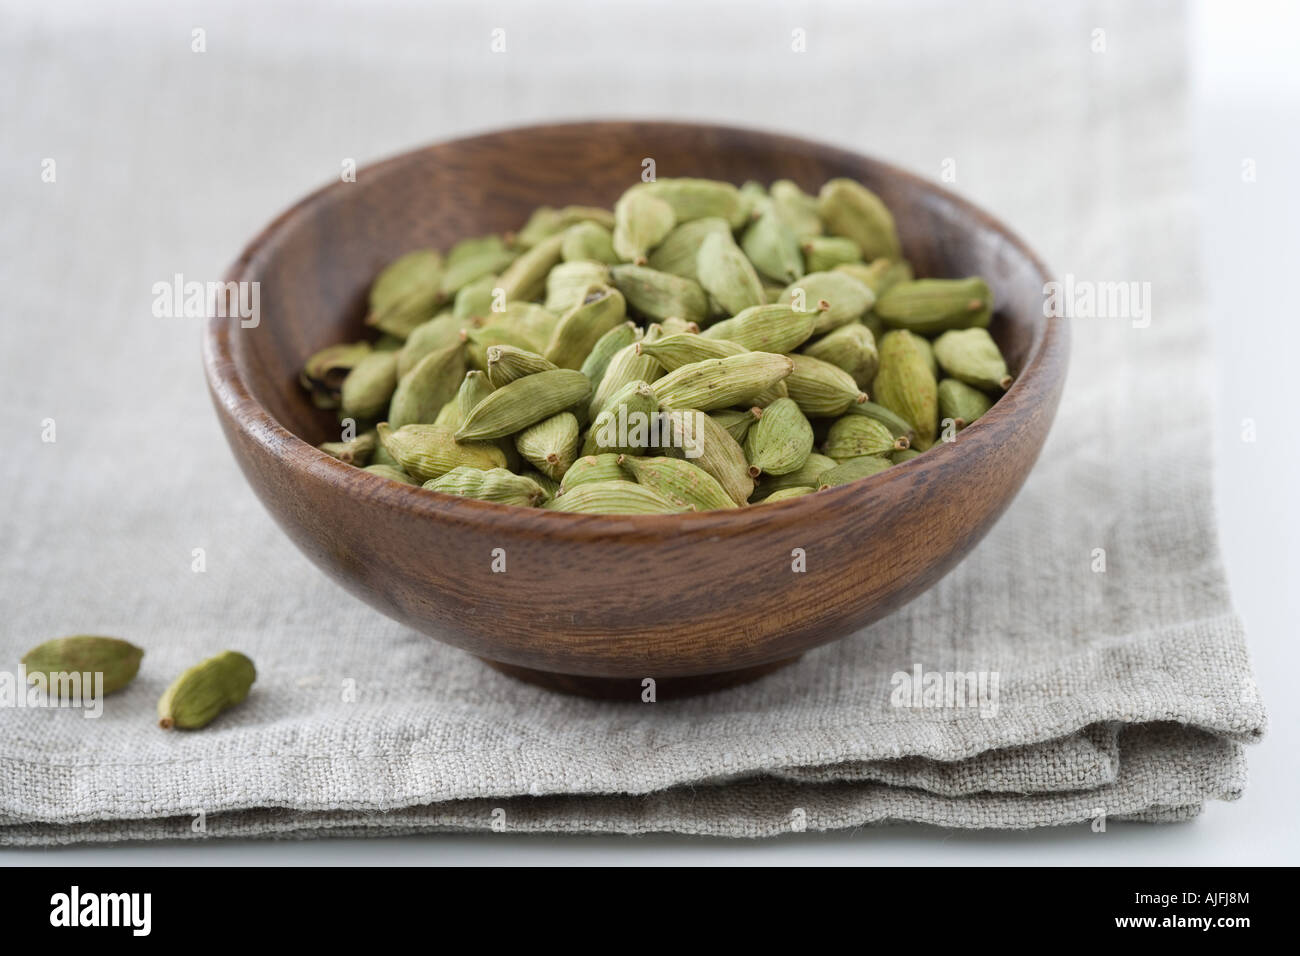 Cardamom seeds in a bowl Stock Photo